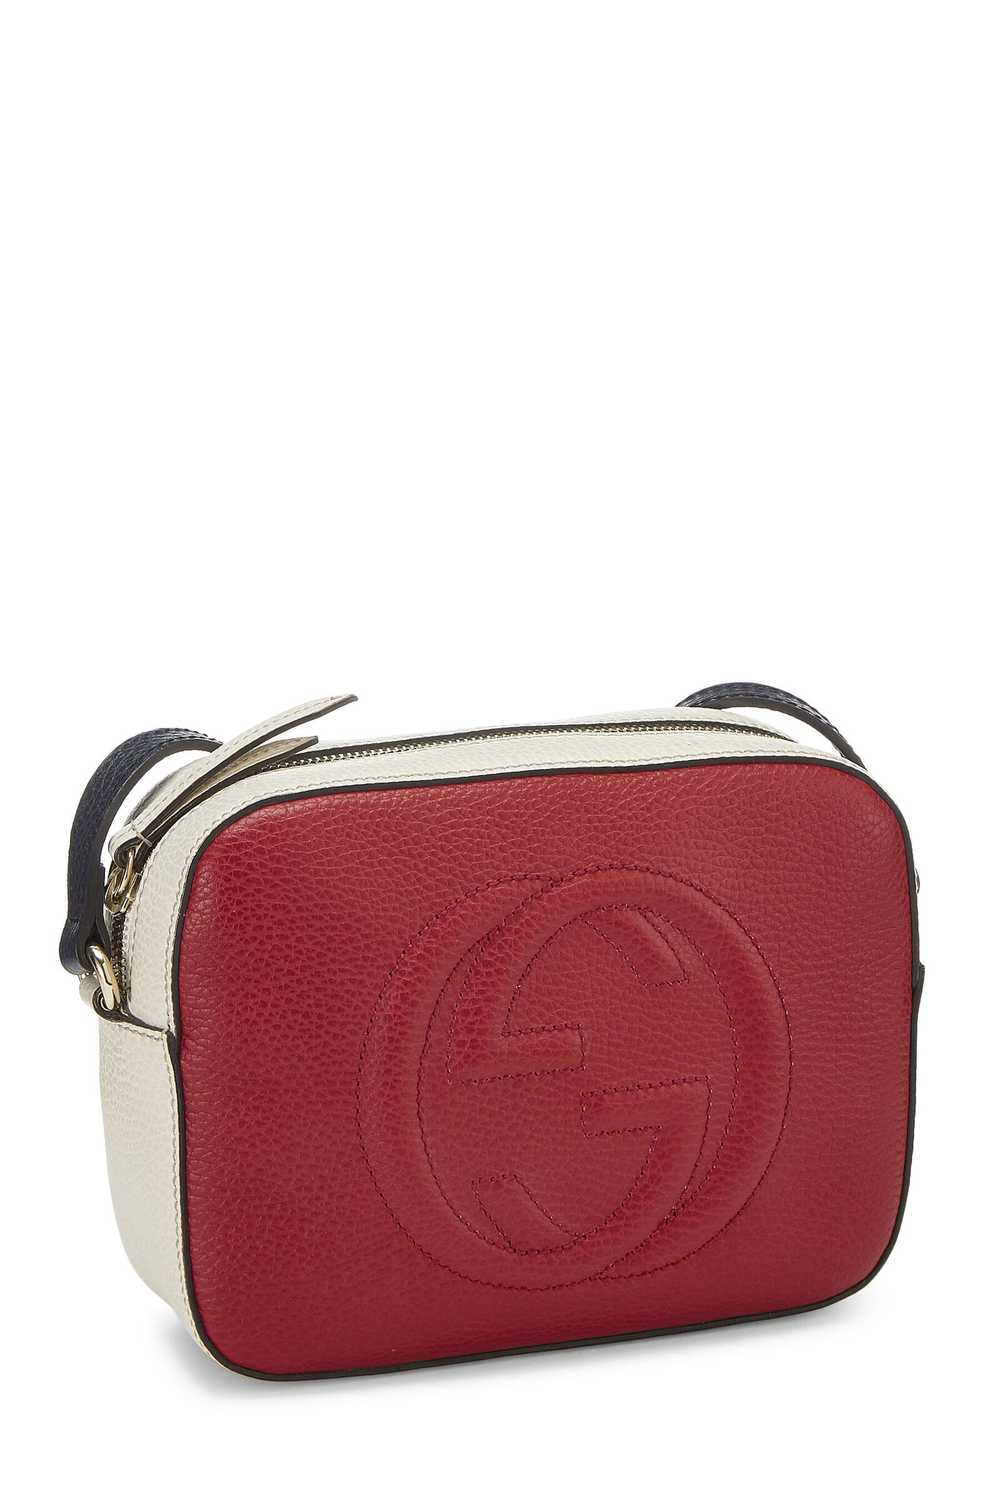 Red Grained Leather Soho Disco - image 4